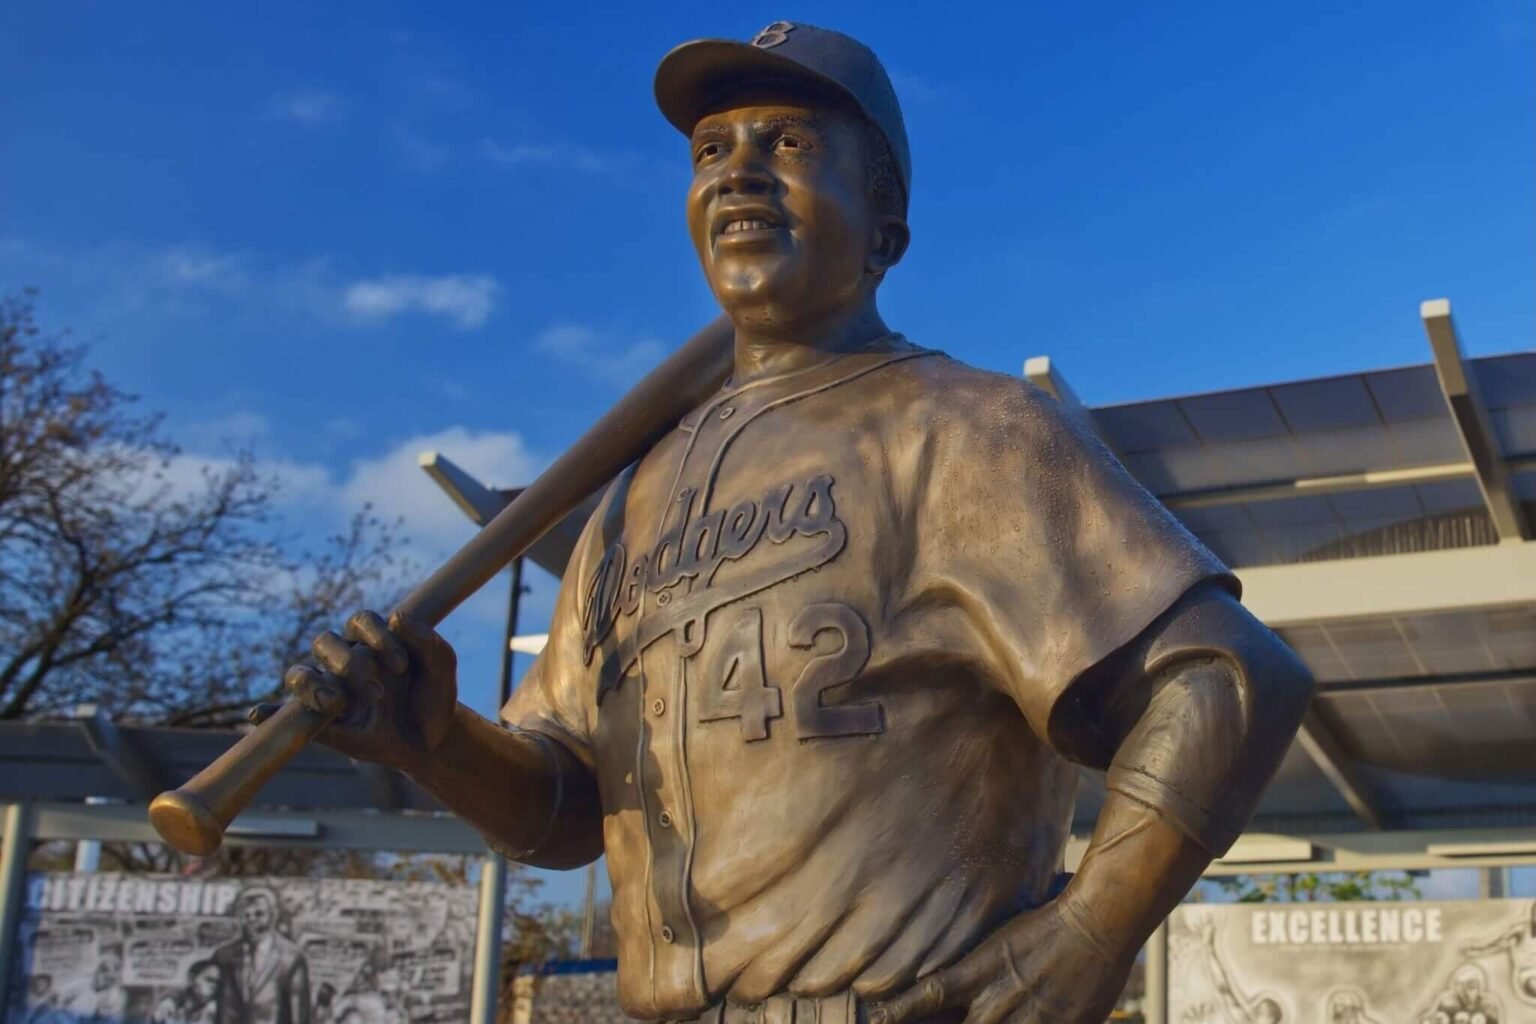 After The Jackie Robinson Statue Is Destroyed, Wichita Rallies Around